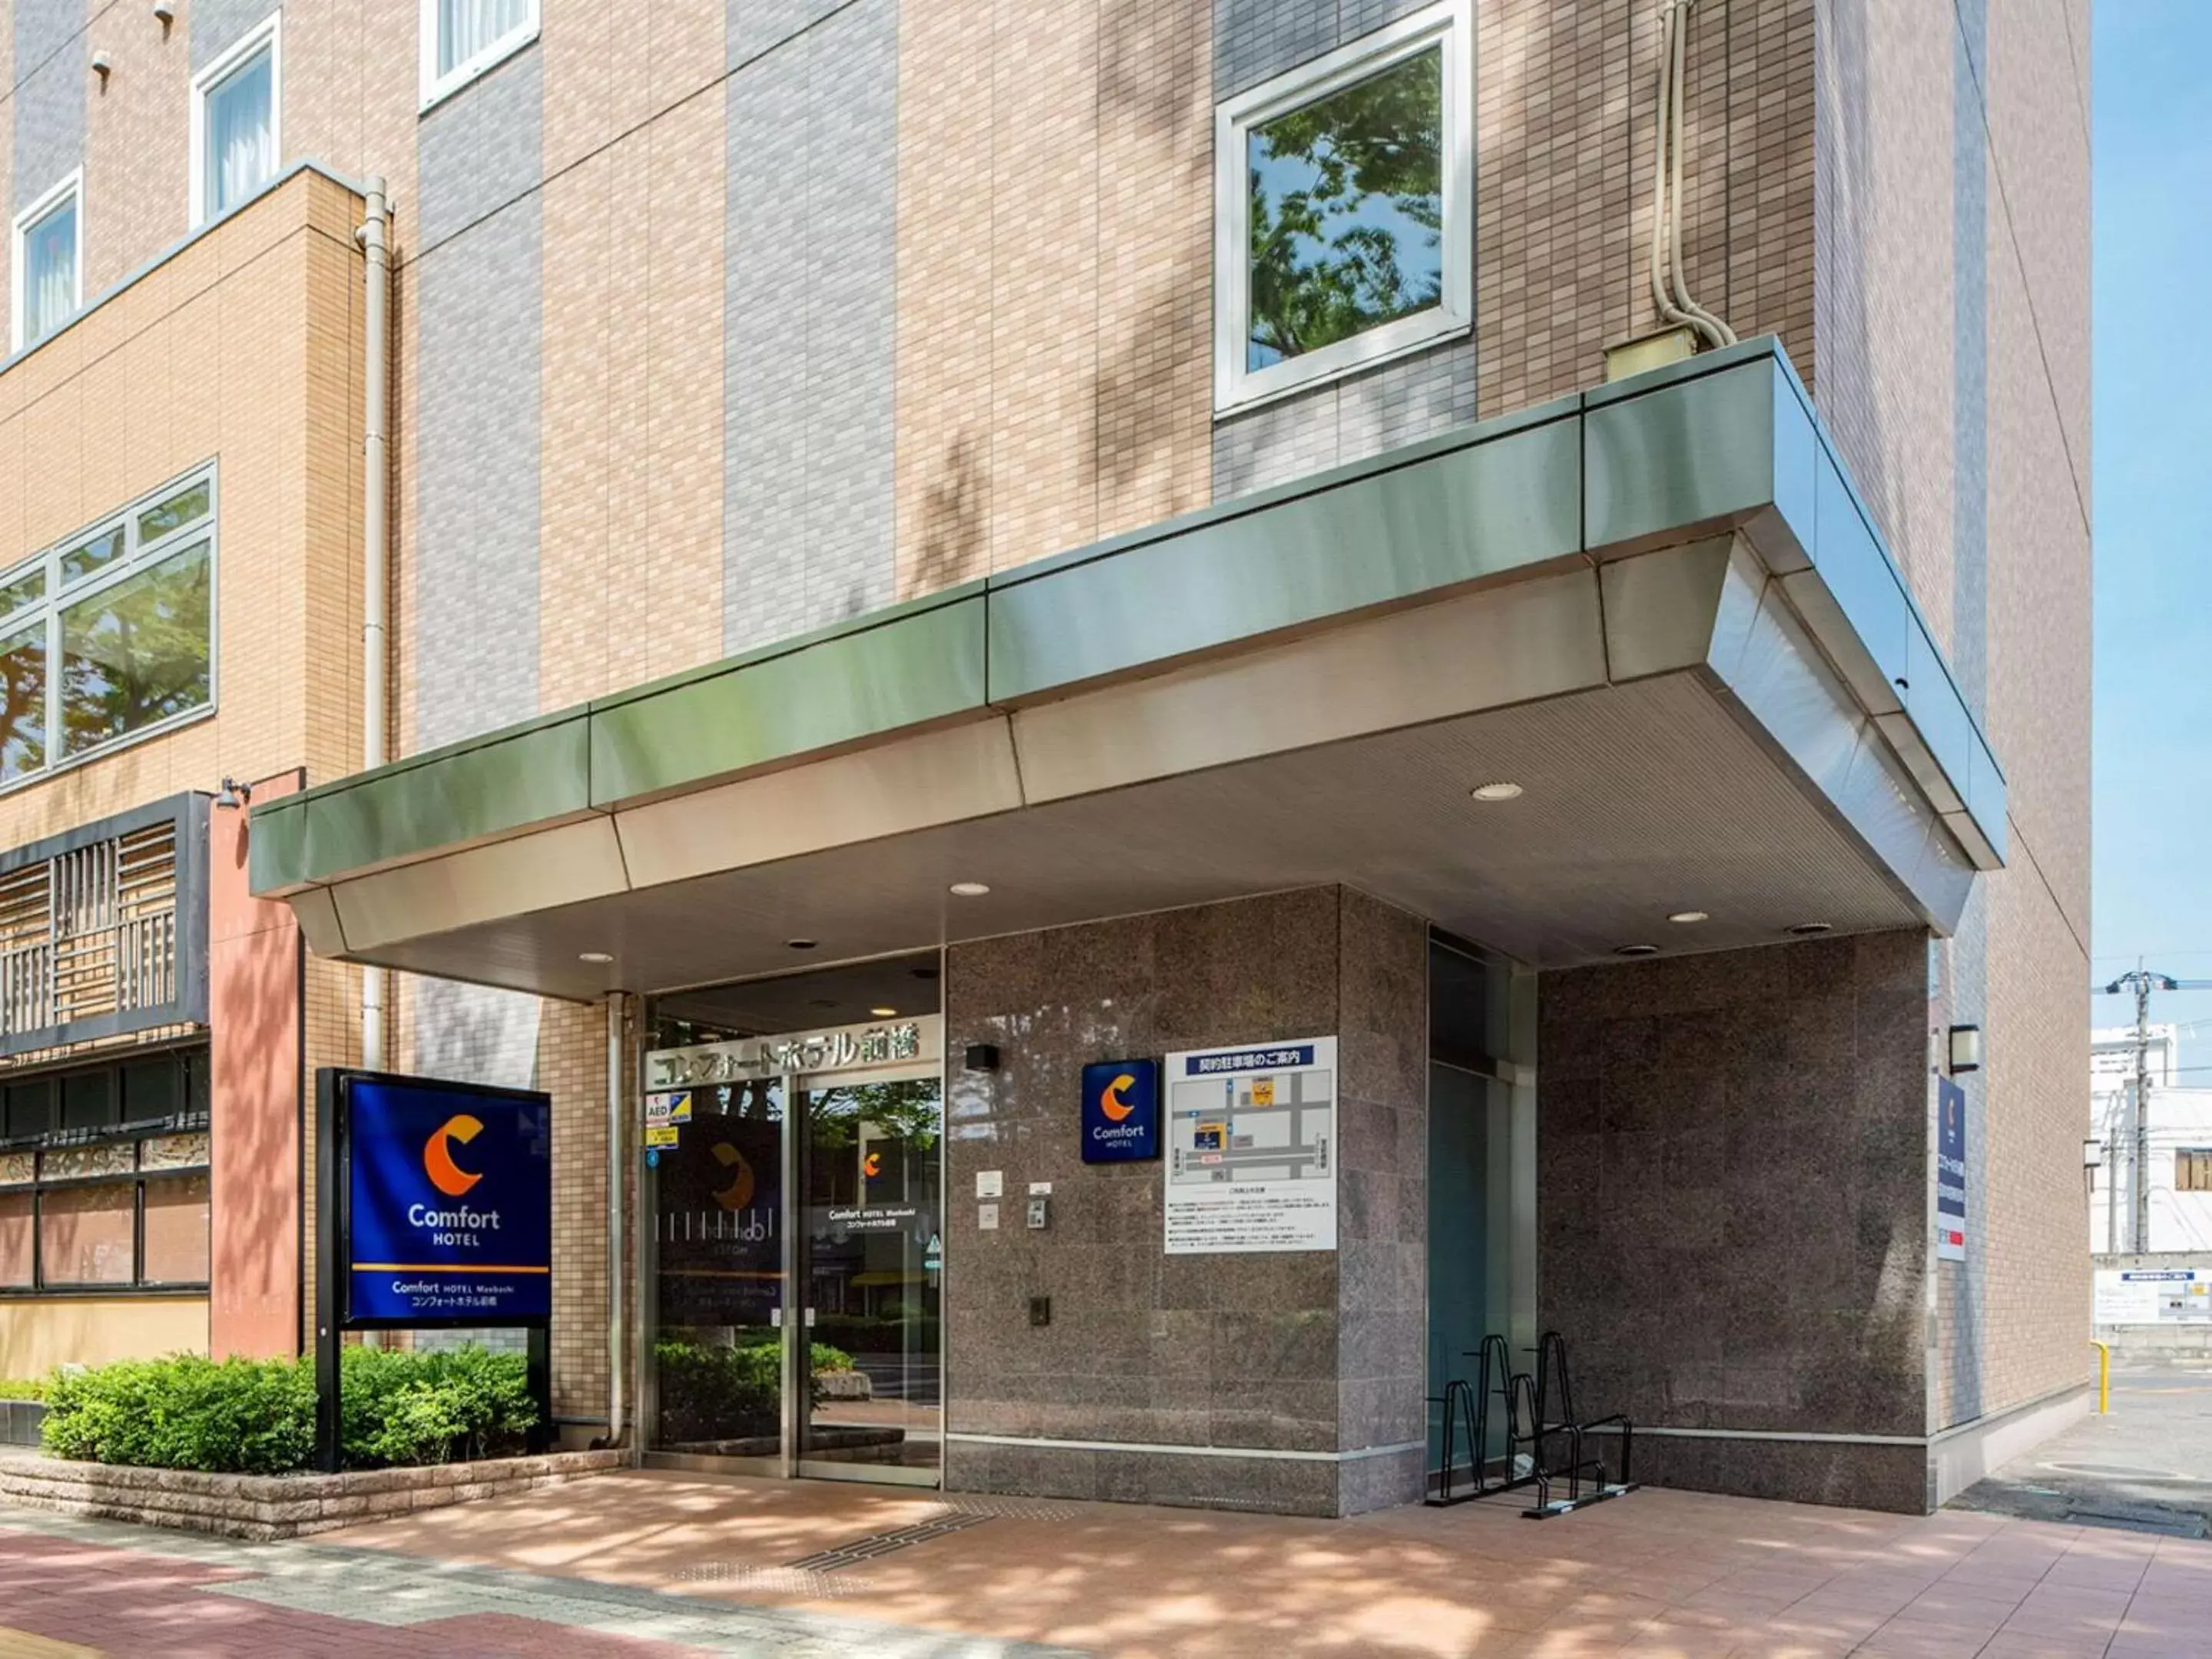 Property building in Comfort Hotel Maebashi